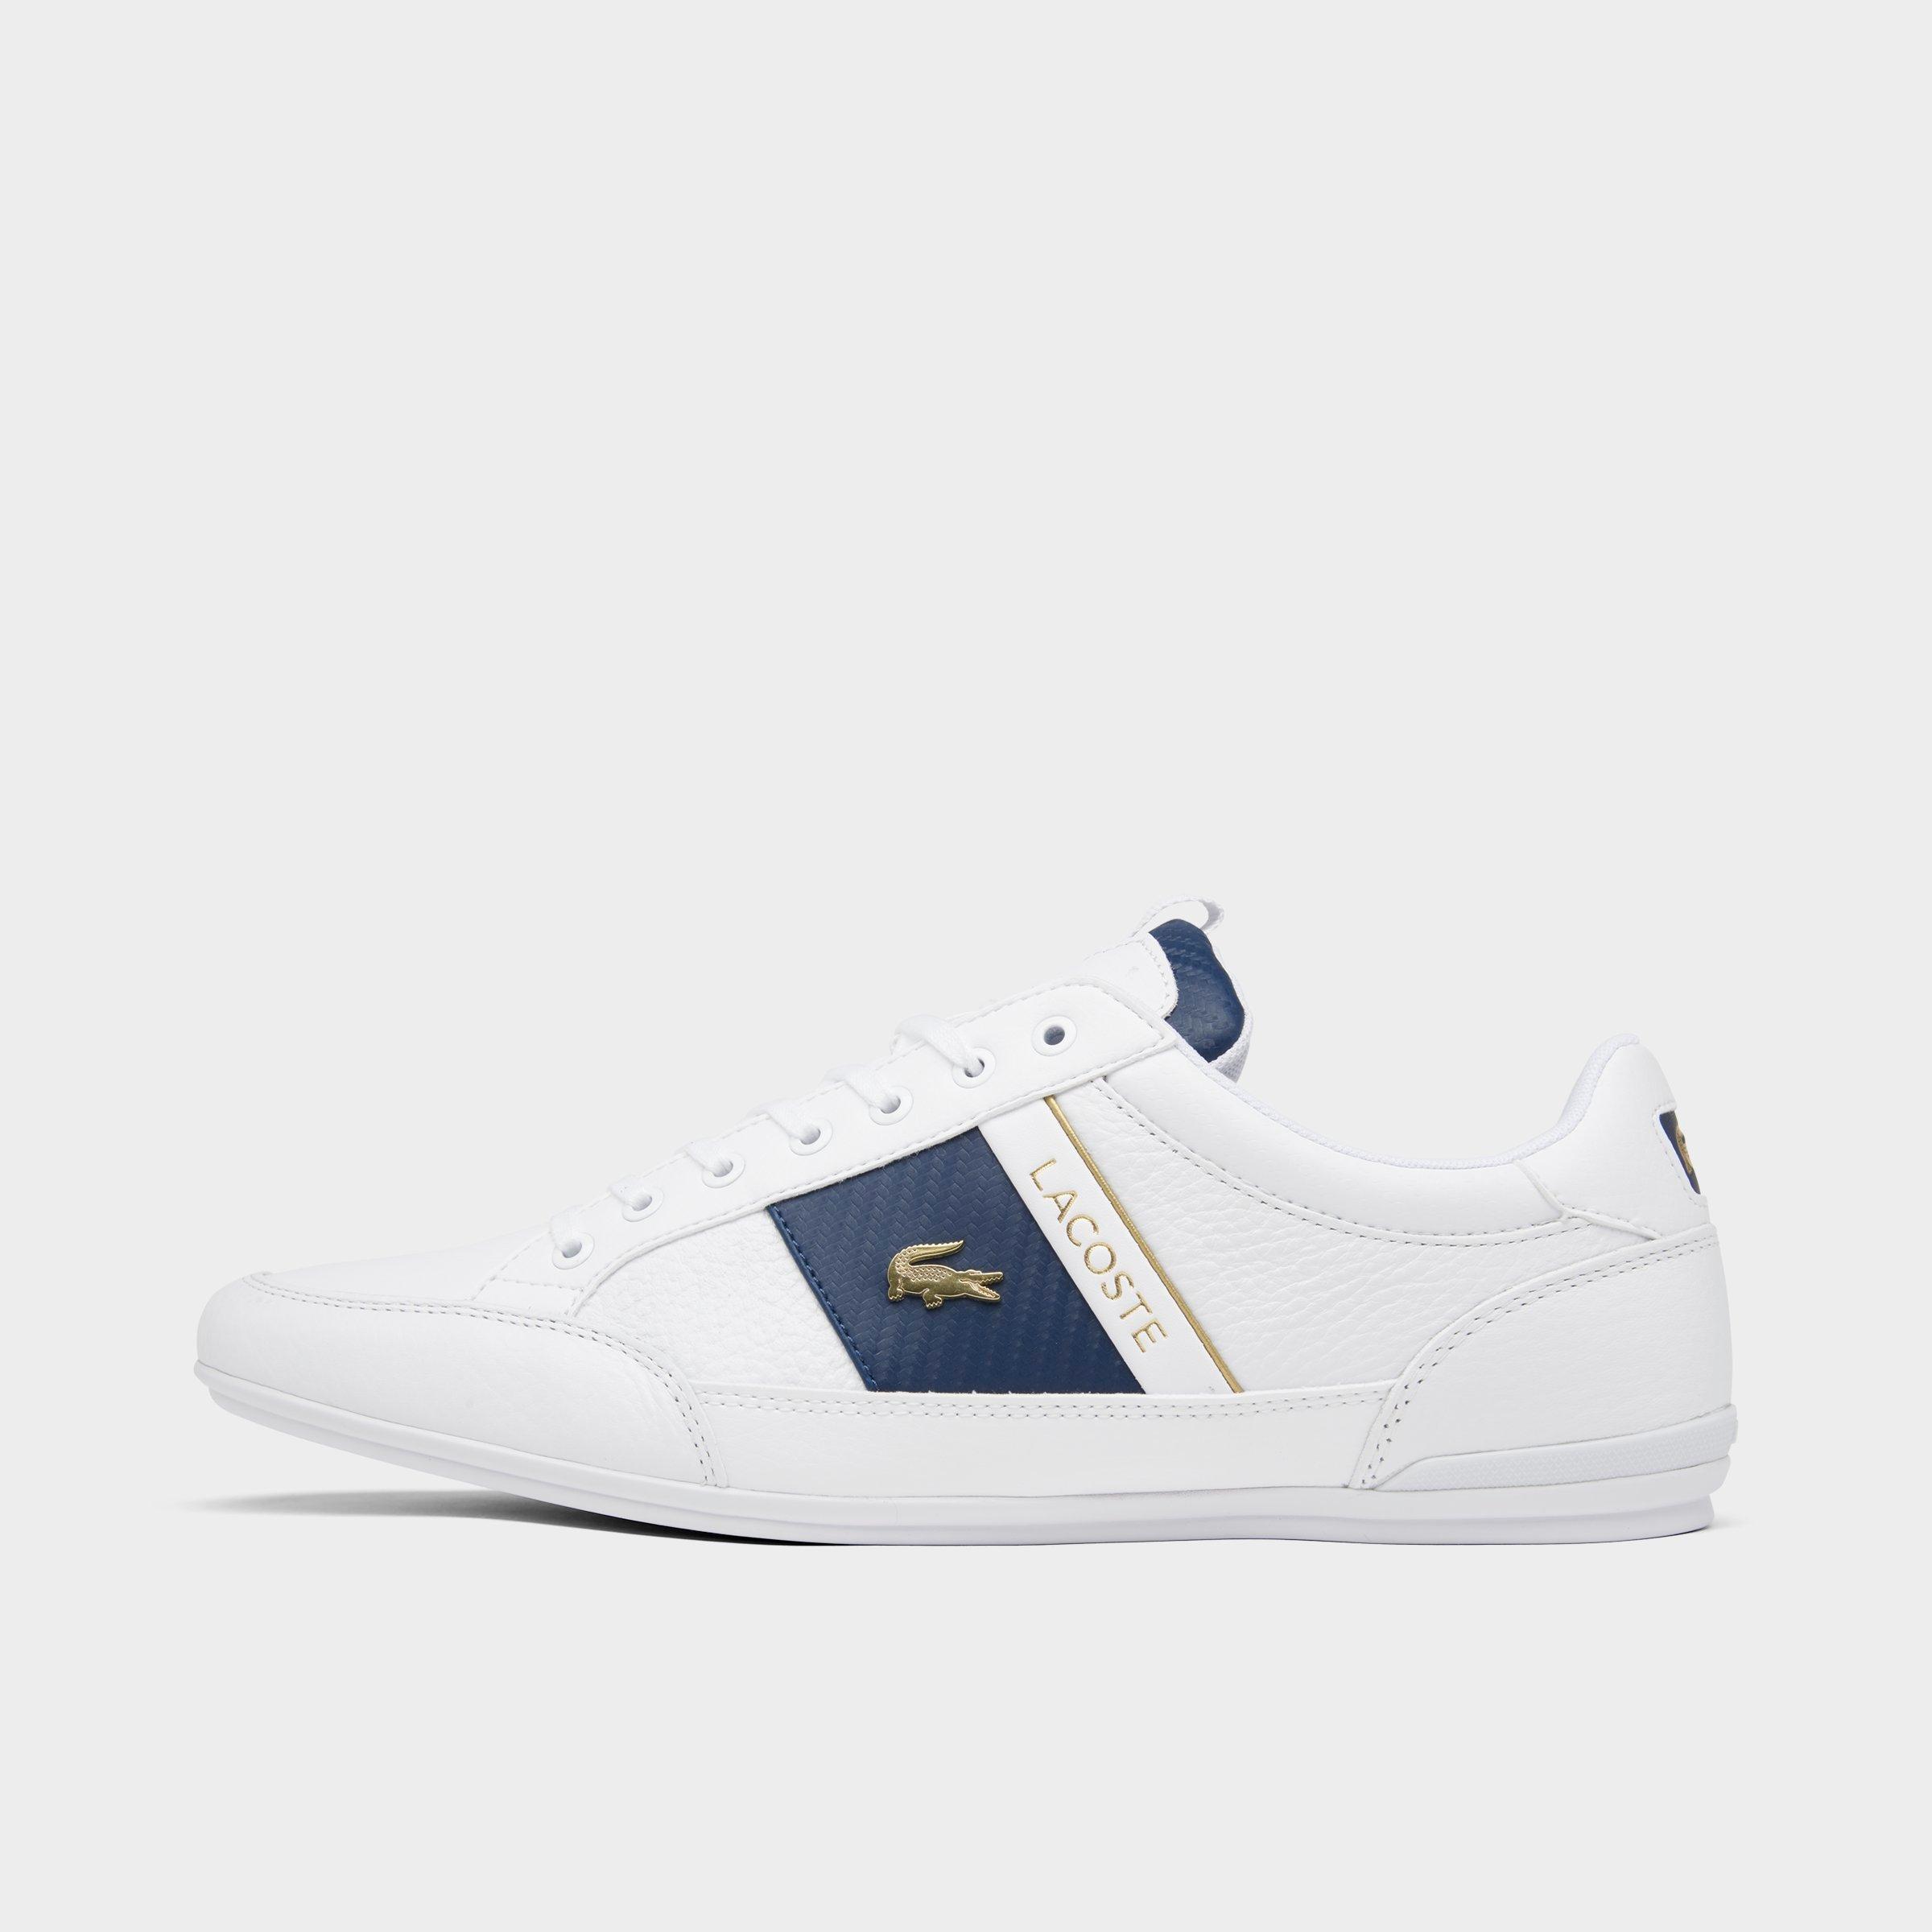 jd sports womens lacoste trainers